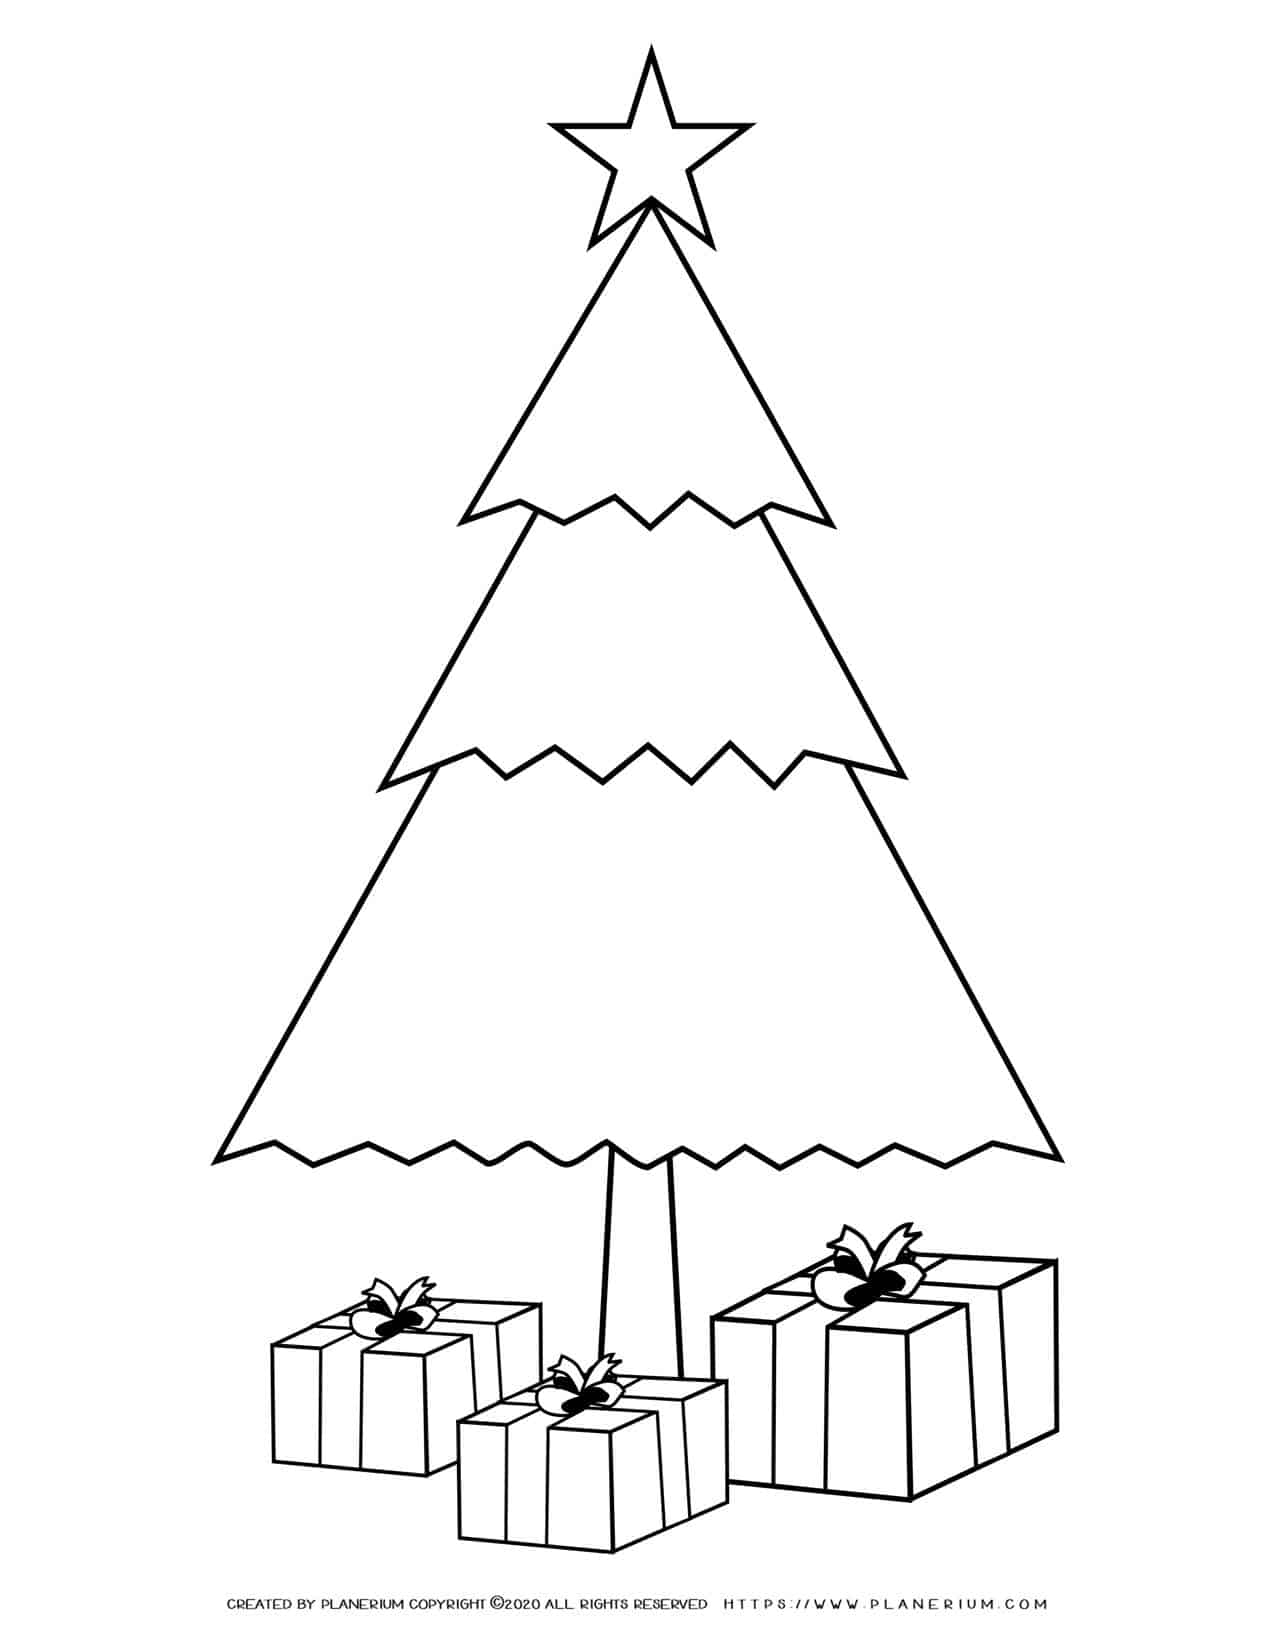 Christmas Tree with Presents Coloring Page | Free Printables | Planerium